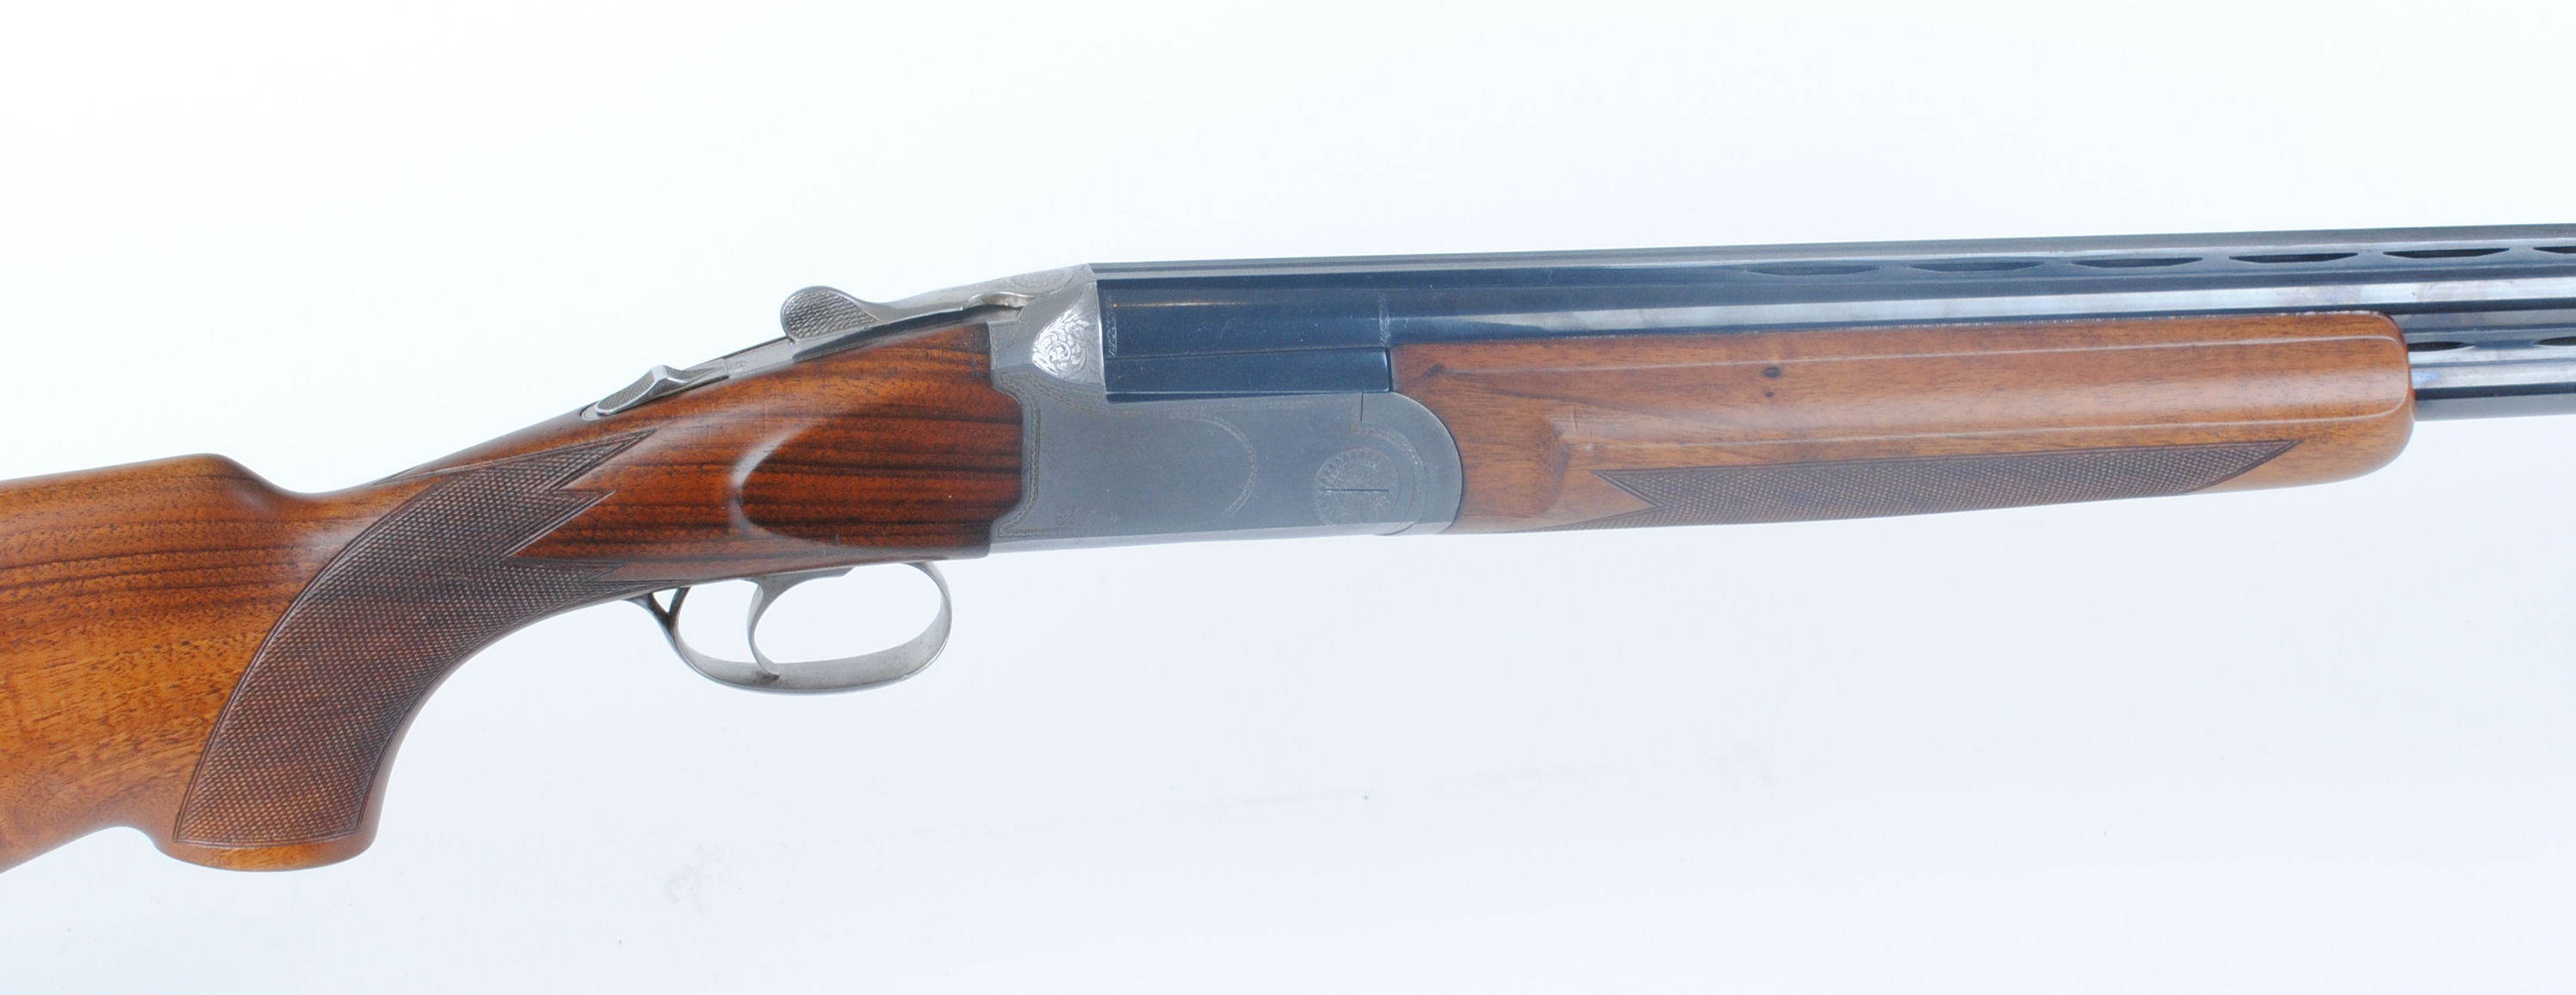 12 bore Zoli, over and under, ejector, 26,3/4 ins barrels, ic & ic, broad ventilated rib, 70mm